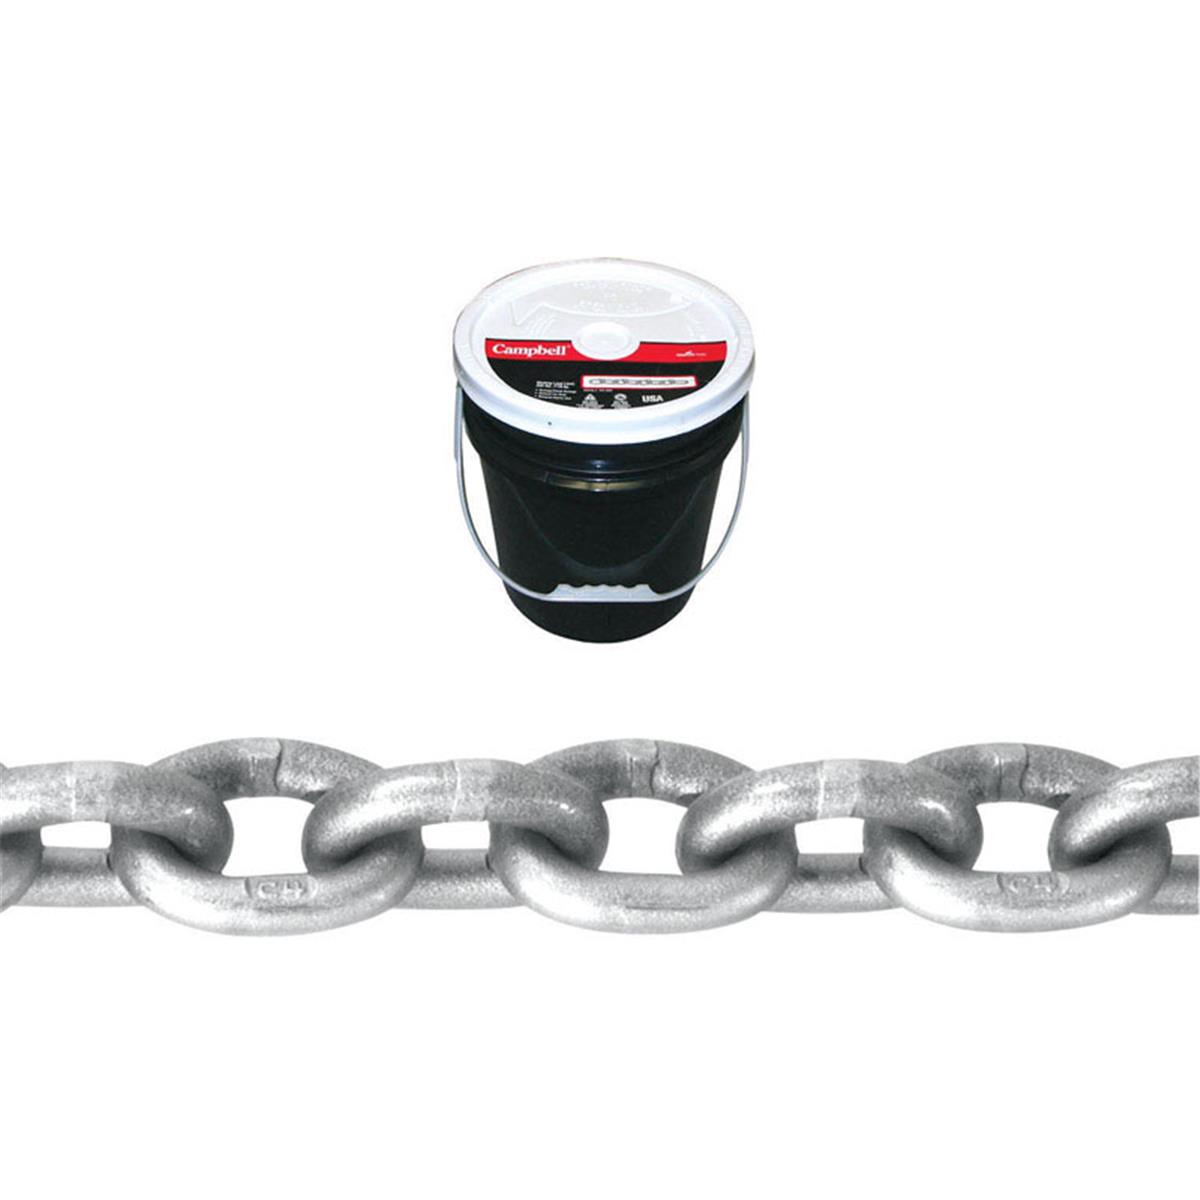 181613 0.4 In. X 75 Ft. Chain High Test, Bright